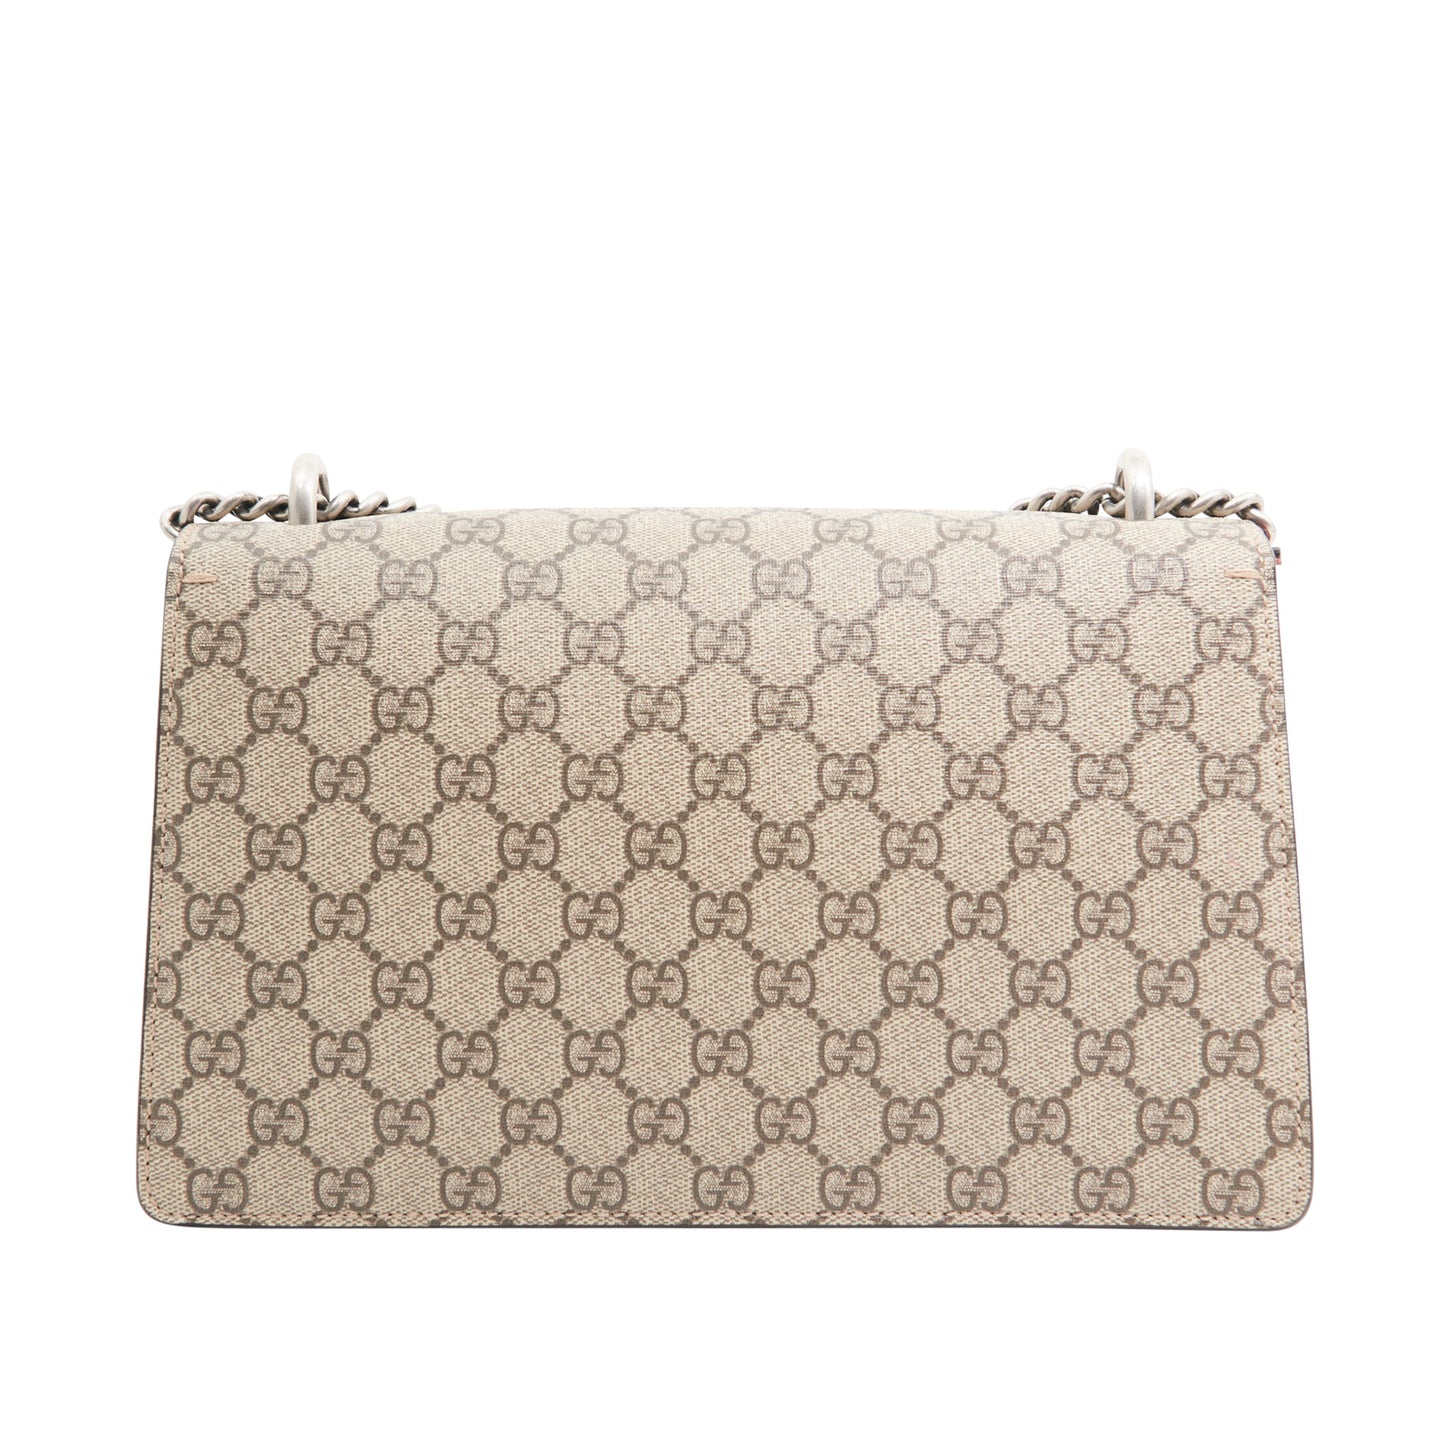 Gucci Canvas Dionysus Small in Brown Monogram and Red Suede SHW